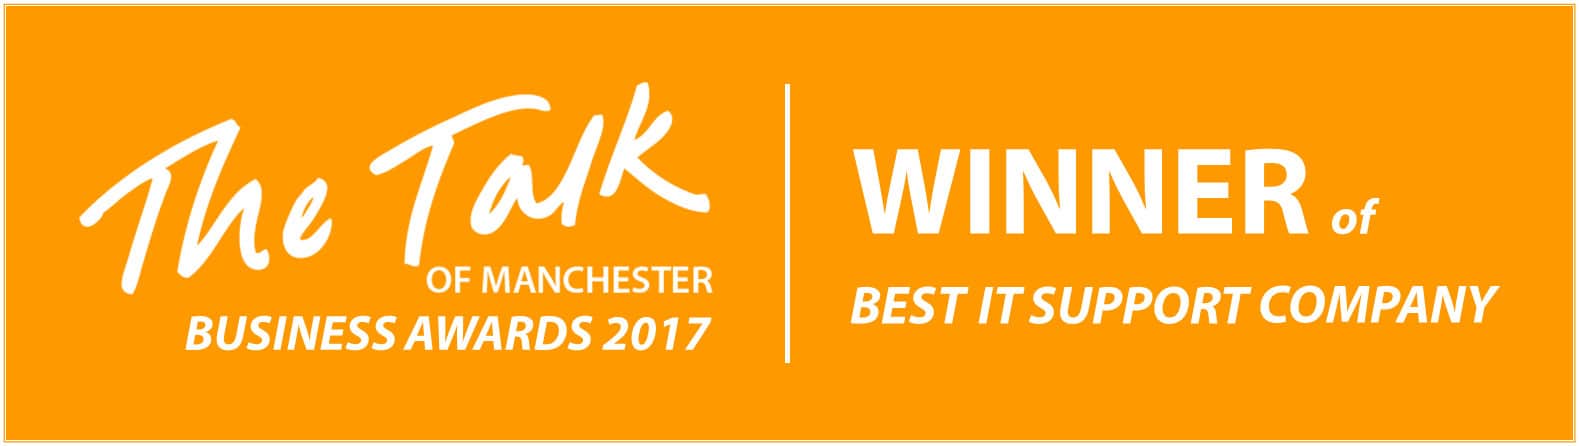 The Talk Business Awards 2017 - Winner - Best IT Support Company